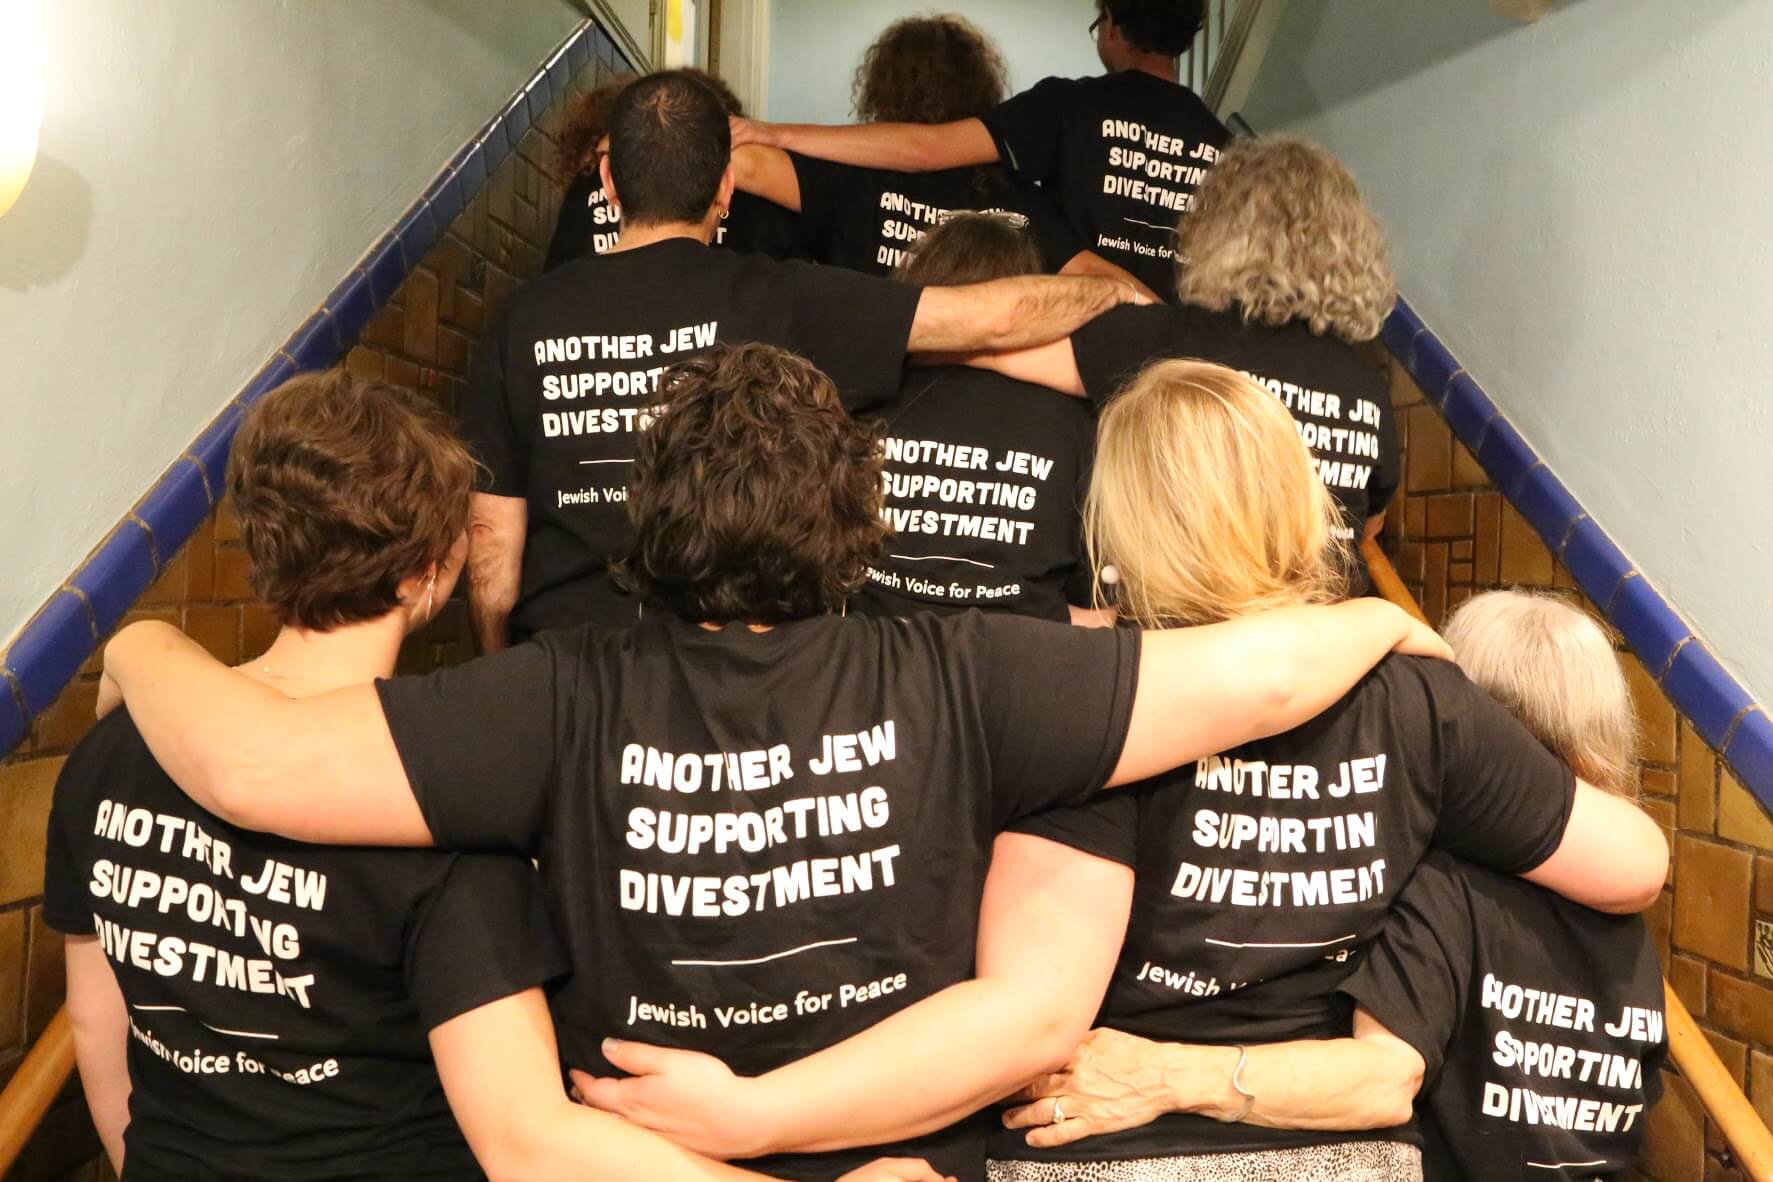 Part of the Jewish Voice for Peace delegation at the 221st Presbyterian General Assembly in Detroit who worked in solidarity with Presbyterian groups on divestment from companies profiting off the Israeli occupation.